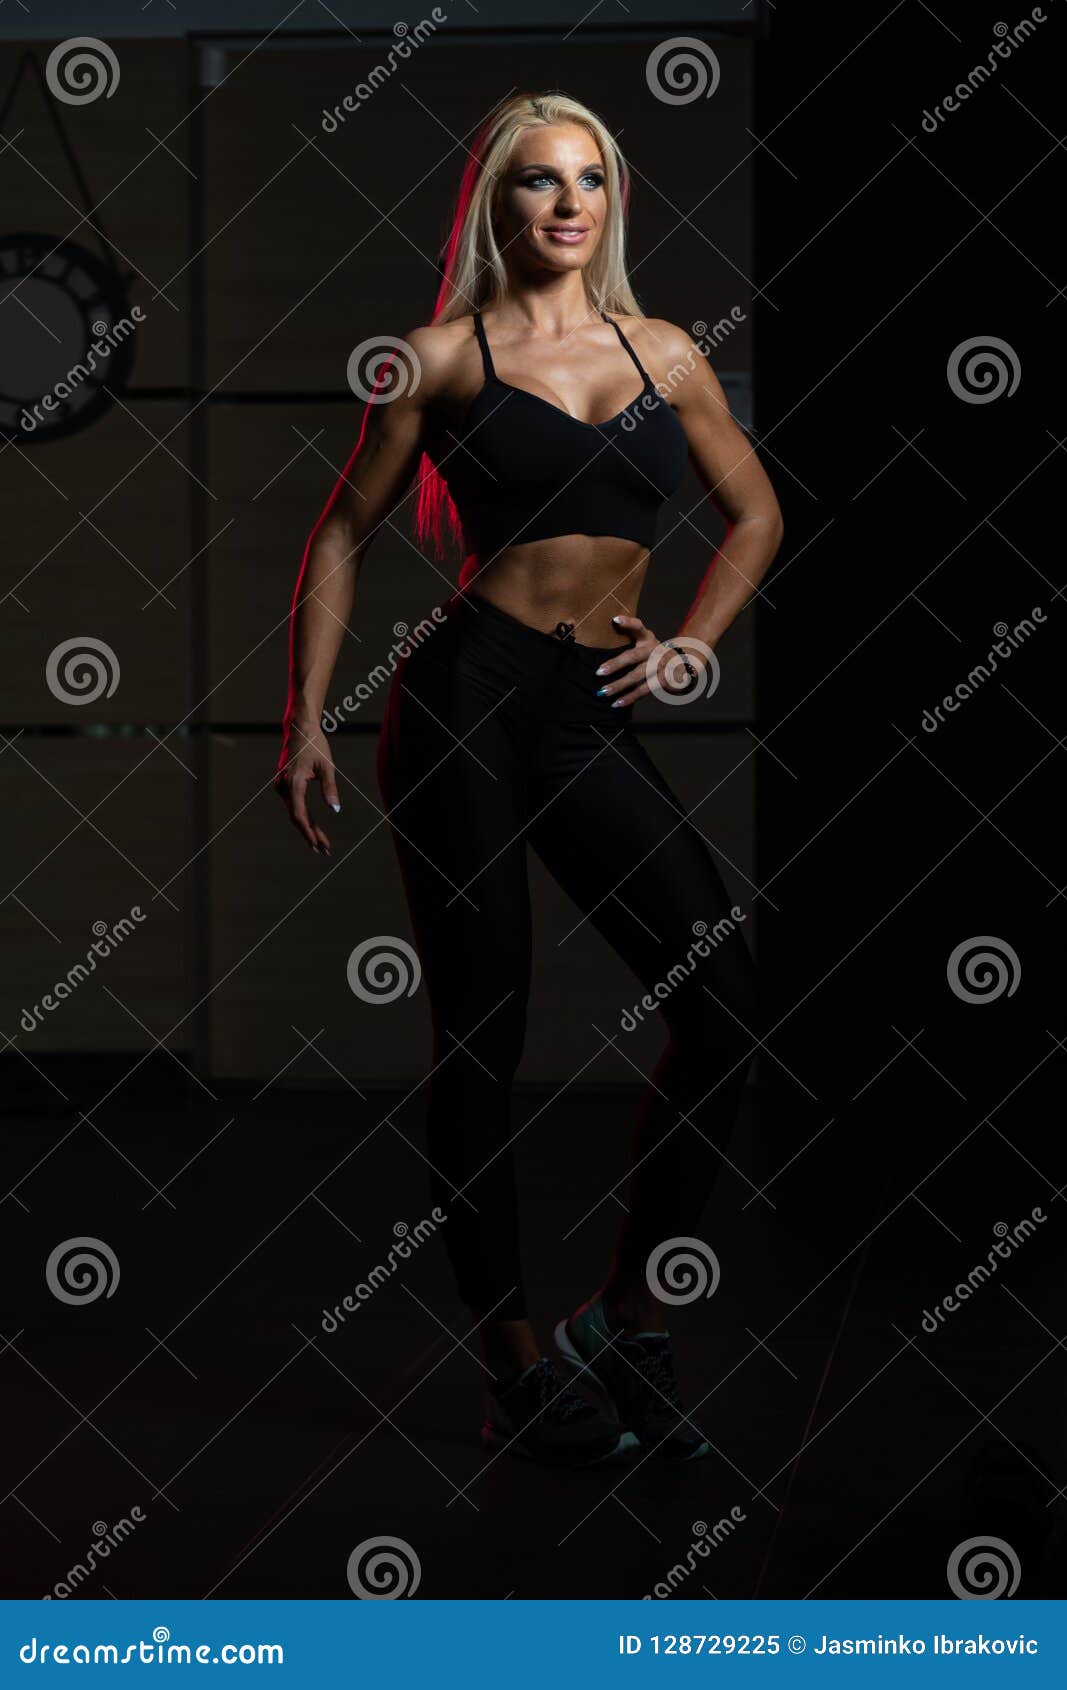 Woman In Gym Showing Her Well Trained Body Stock Image Image Of Bench